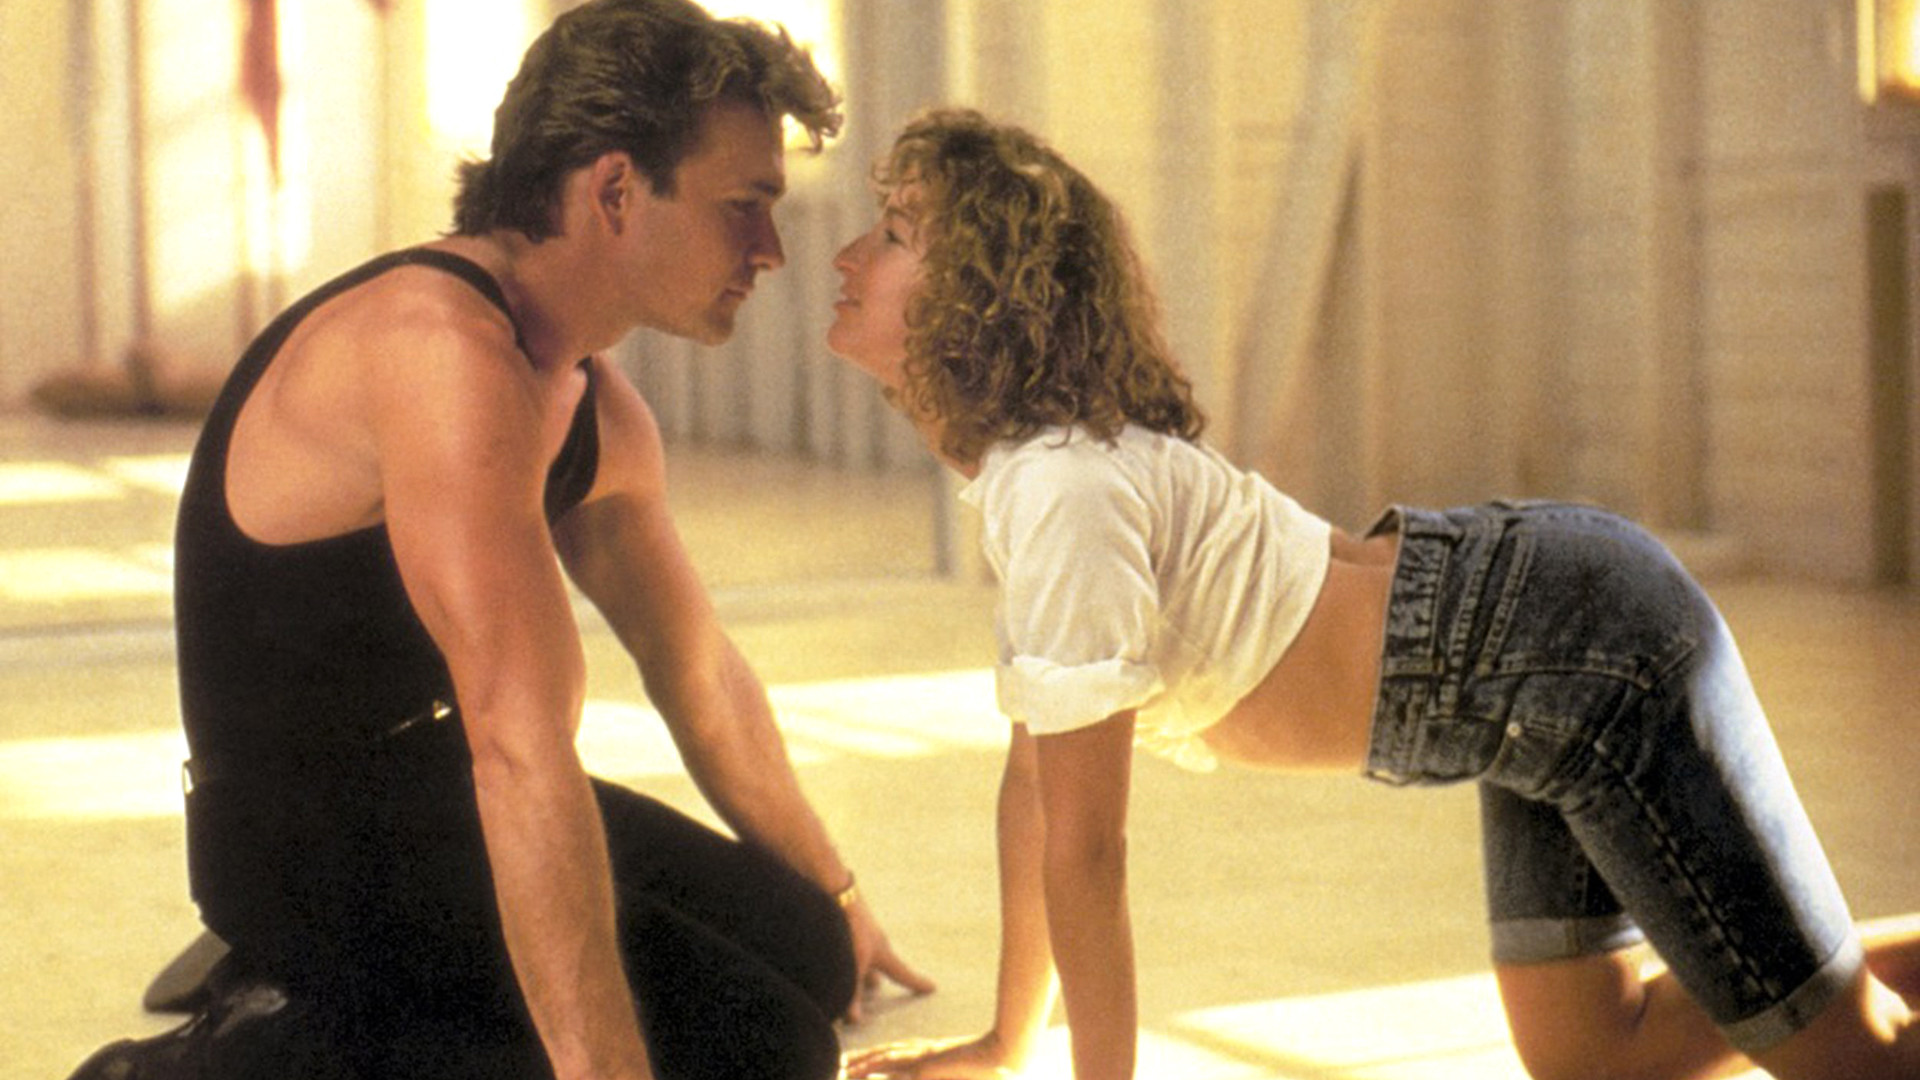 1920x1080 'Dirty Dancing' turns 30: Here are 6 things to know about the '80s classic  - TODAY.com